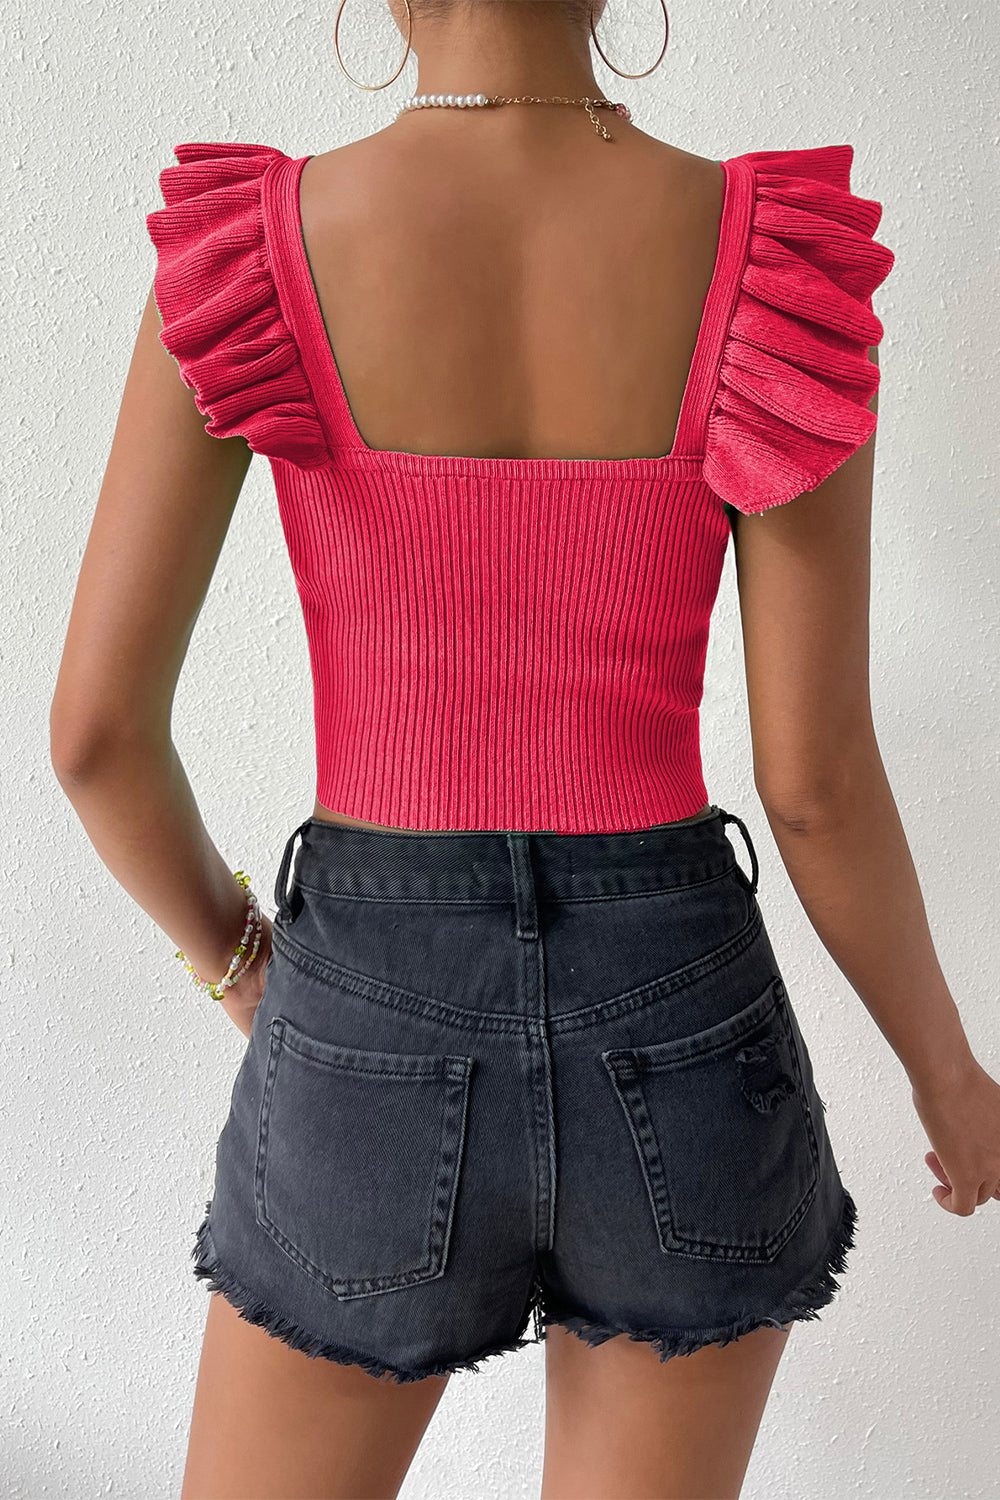 Stylish Square Neck Tie Front Knit Top